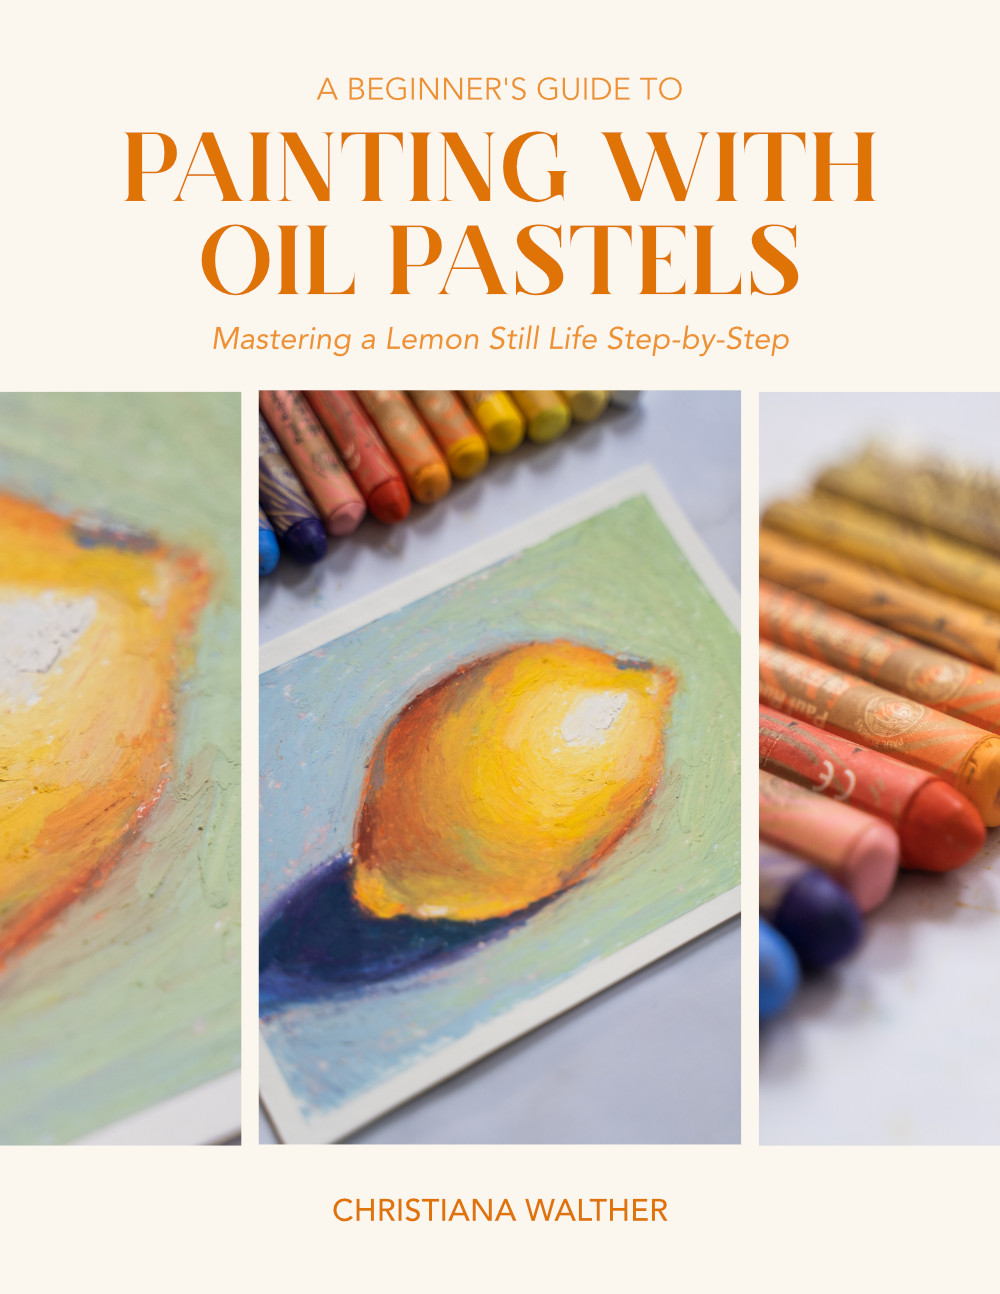 Best Oil Painting Books For Beginners